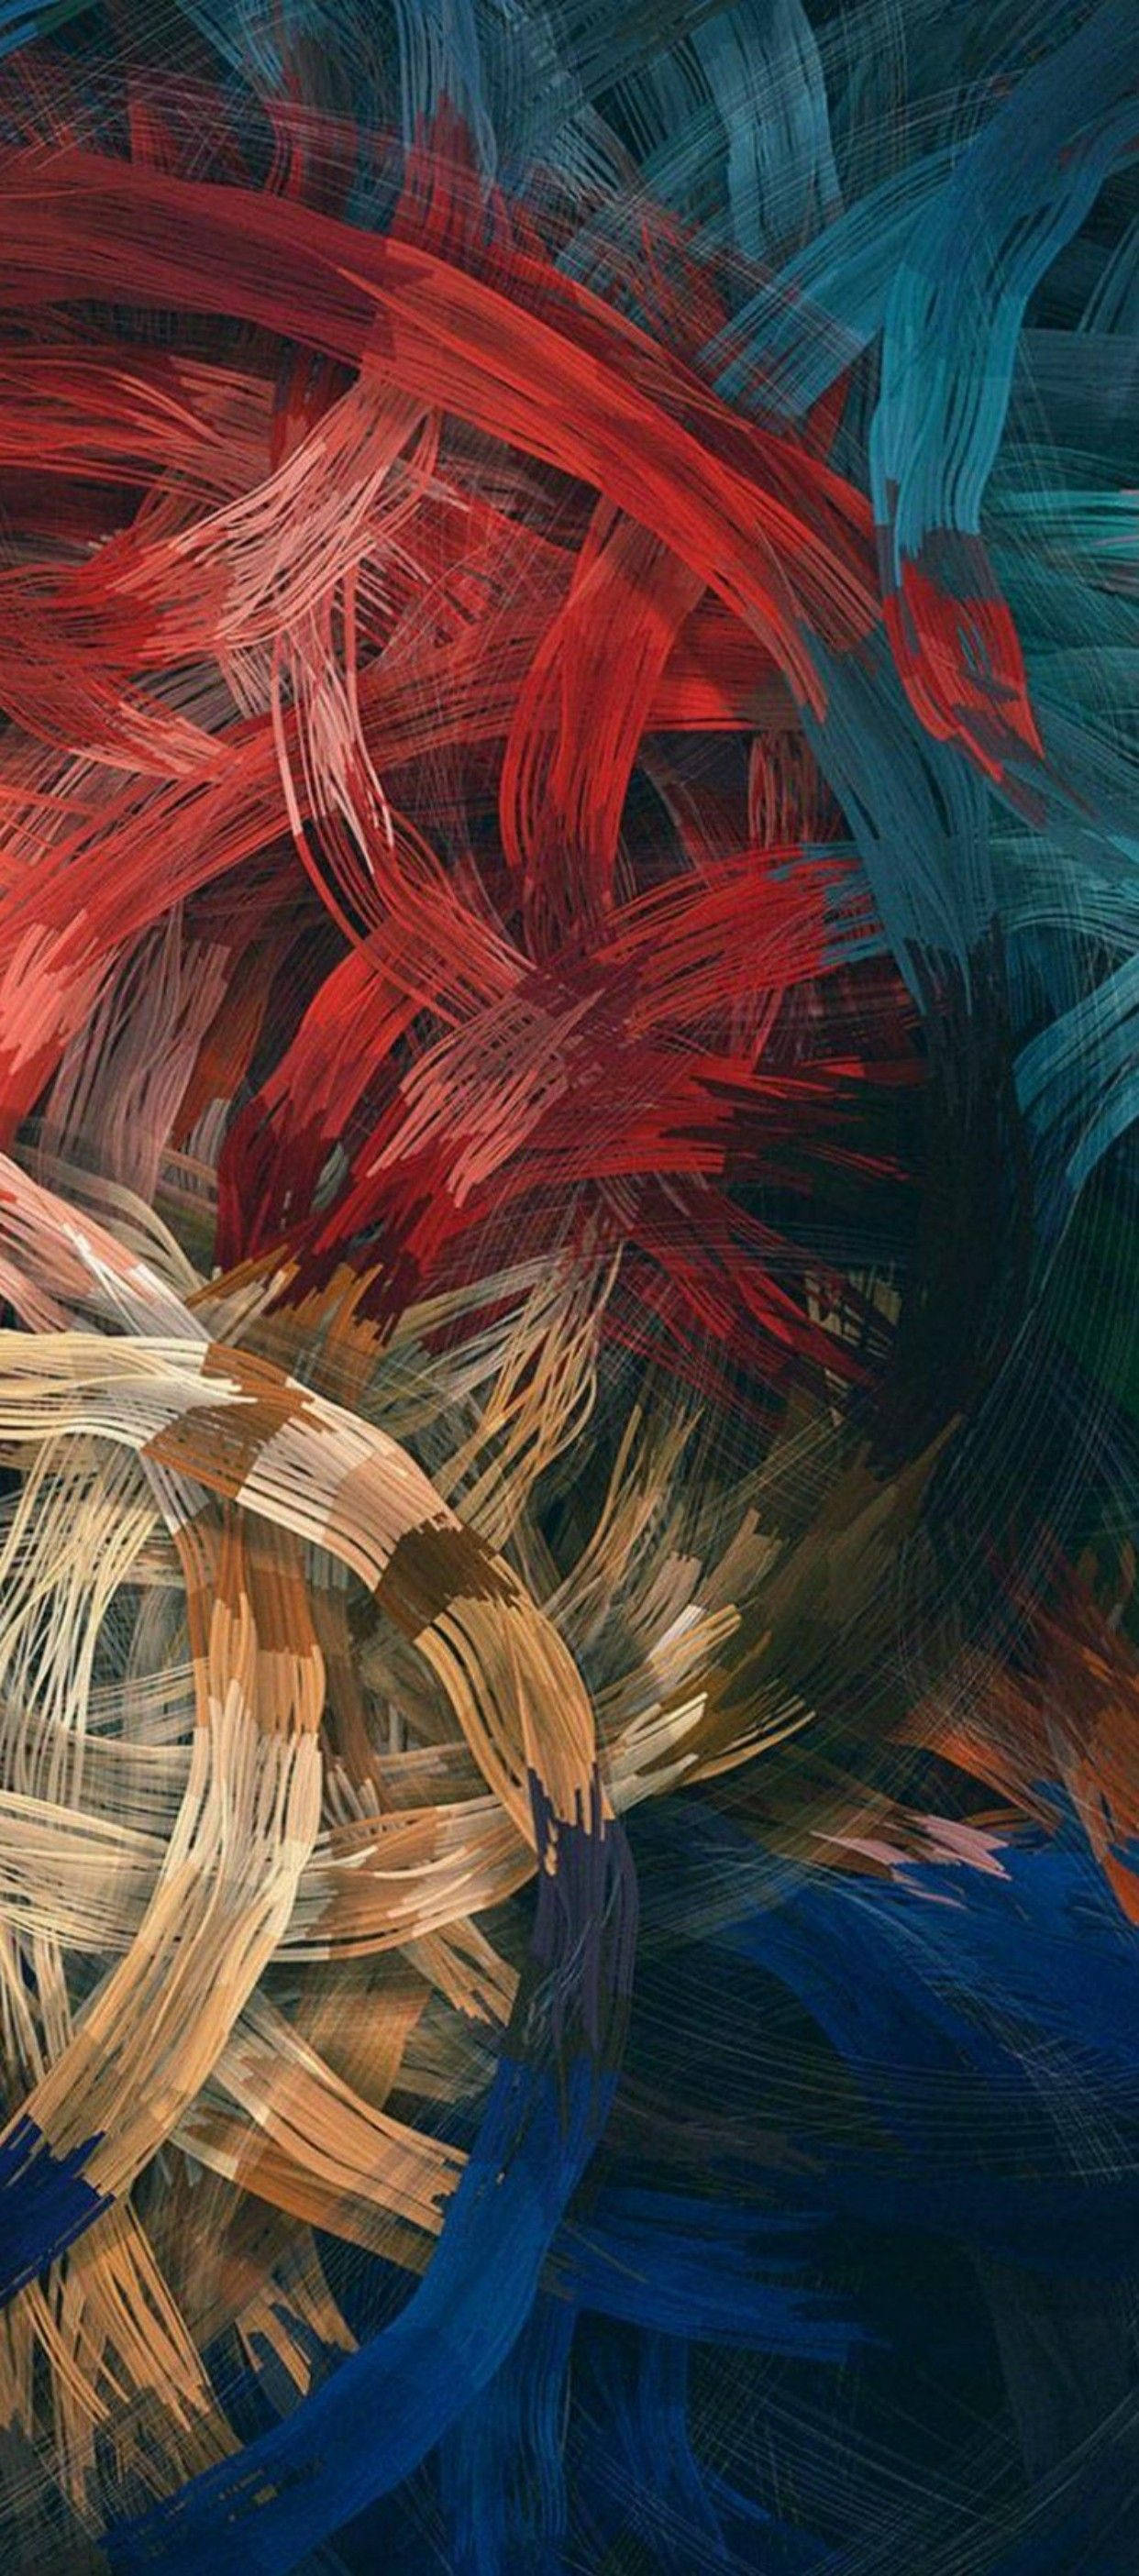 Download Samsung Galaxy J7 Red Blue Brown Abstract Wallpaper | Wallpapers .com